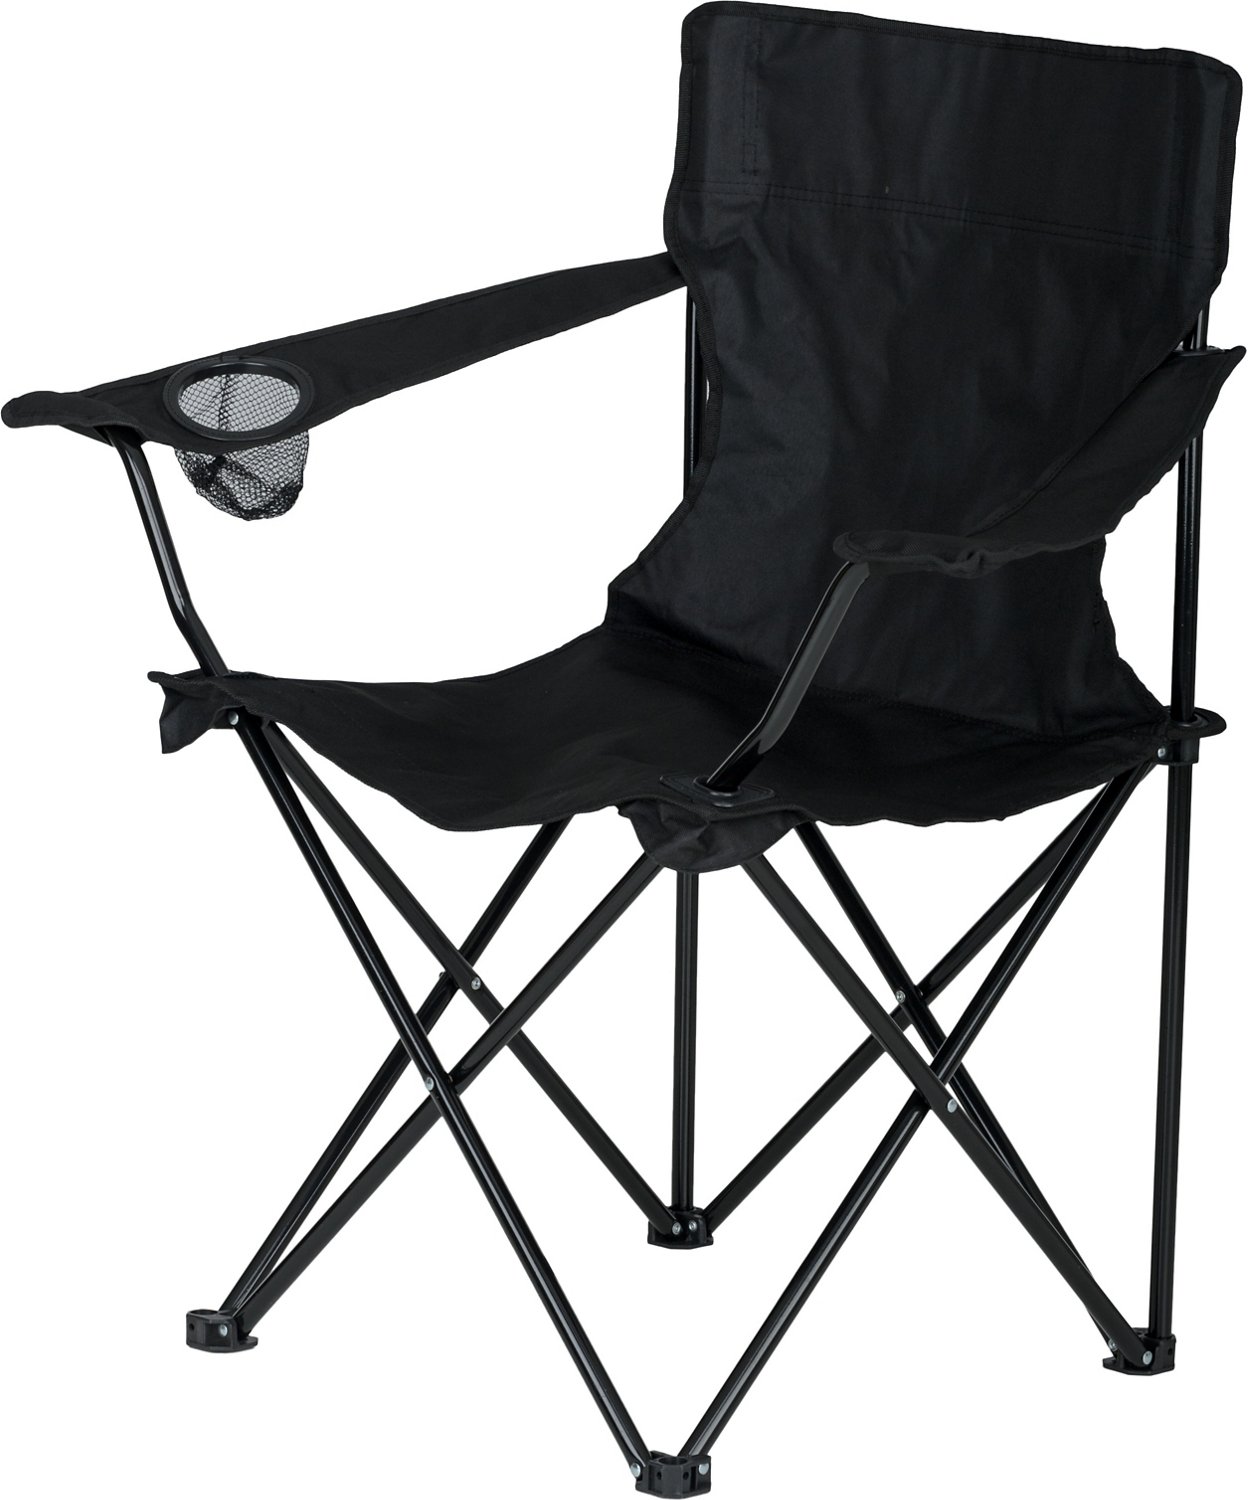 Camping & Folding Chairs